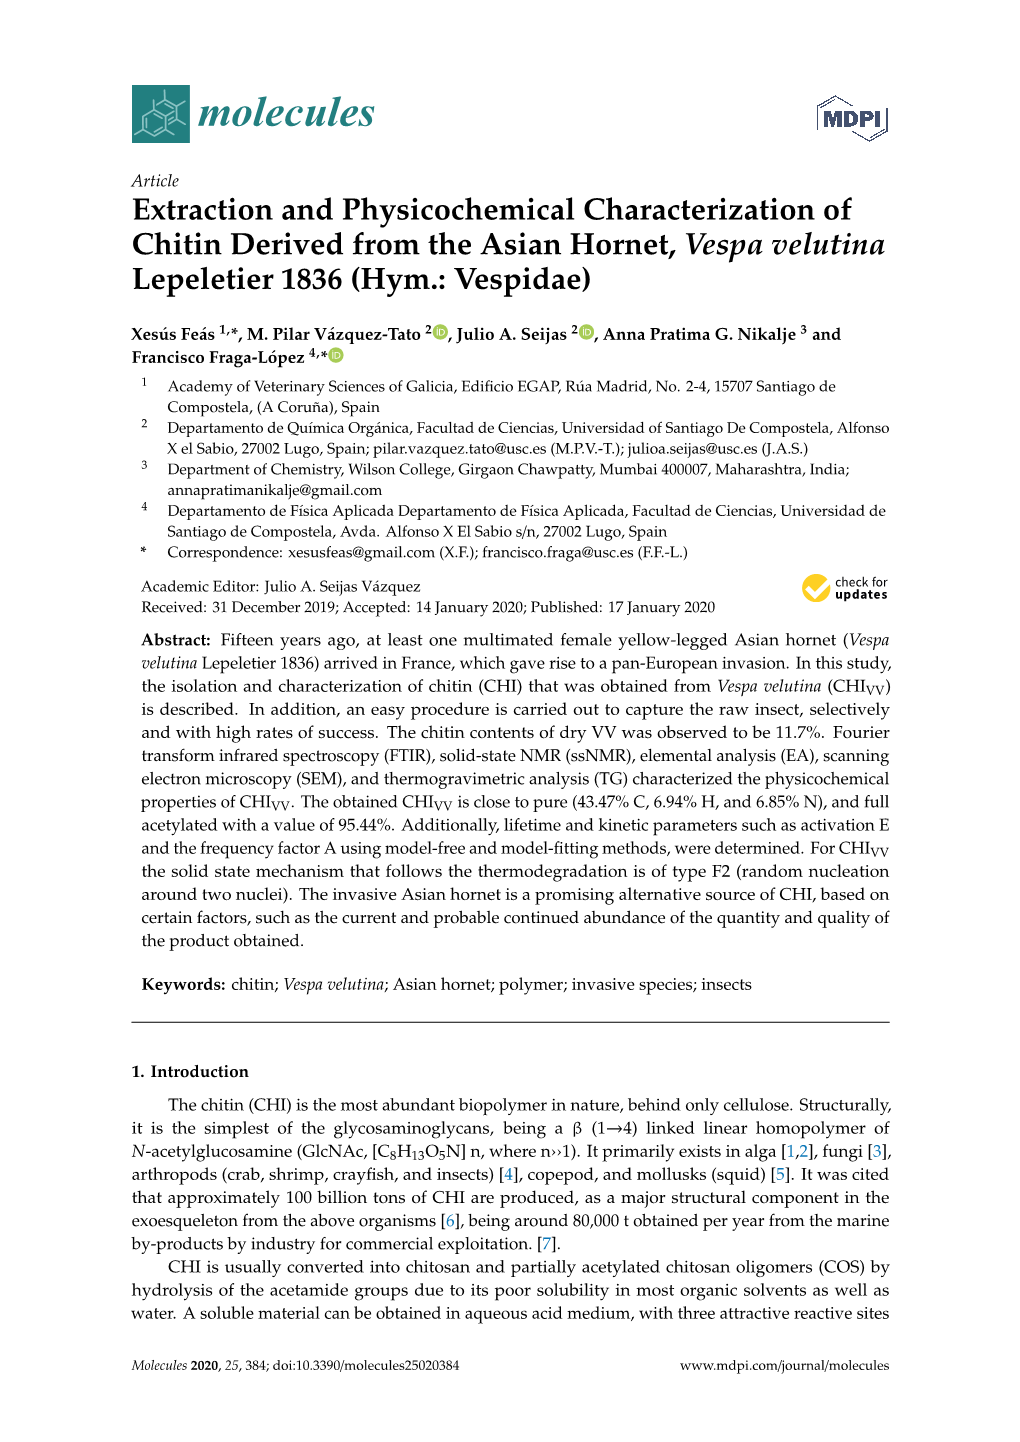 Extraction and Physicochemical Characterization of Chitin Derived from the Asian Hornet, Vespa Velutina Lepeletier 1836 (Hym.: Vespidae)